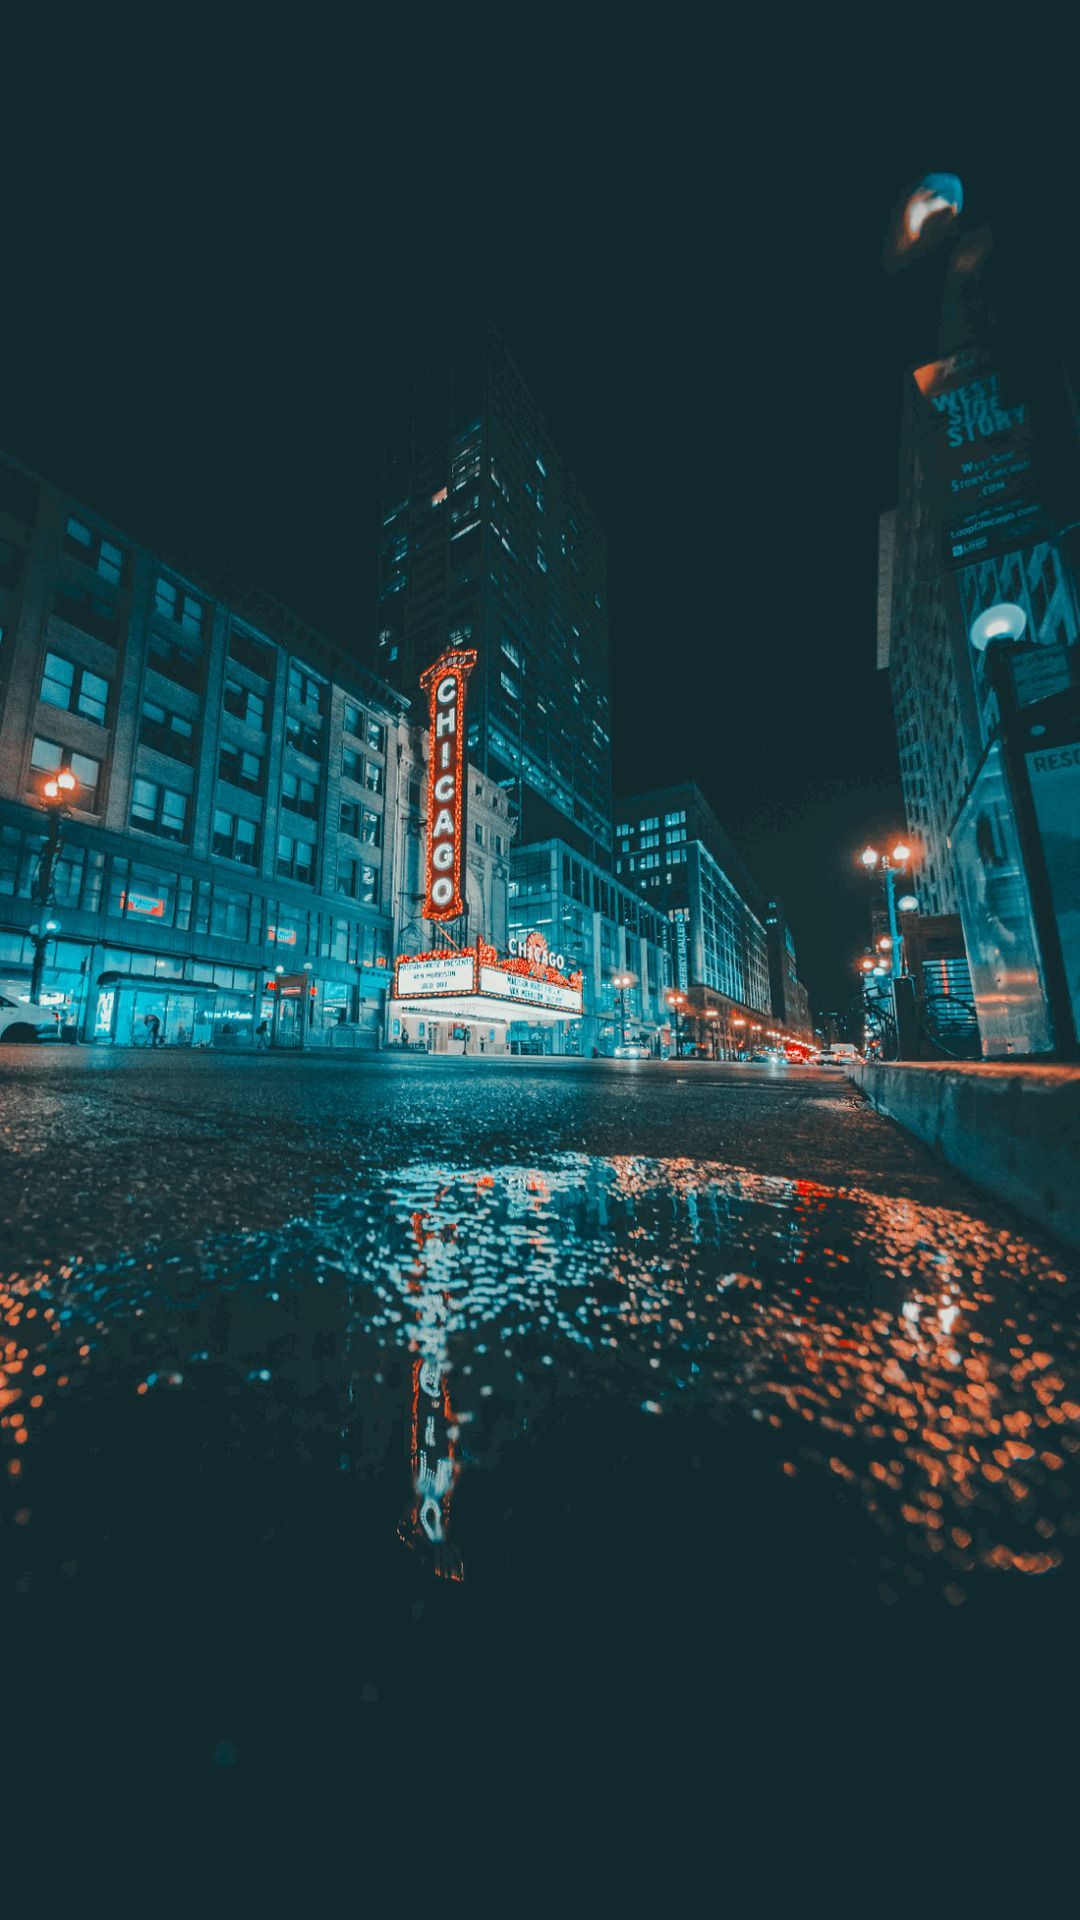 IPhone wallpaper of a city street at night with a puddle in the foreground. - City, night